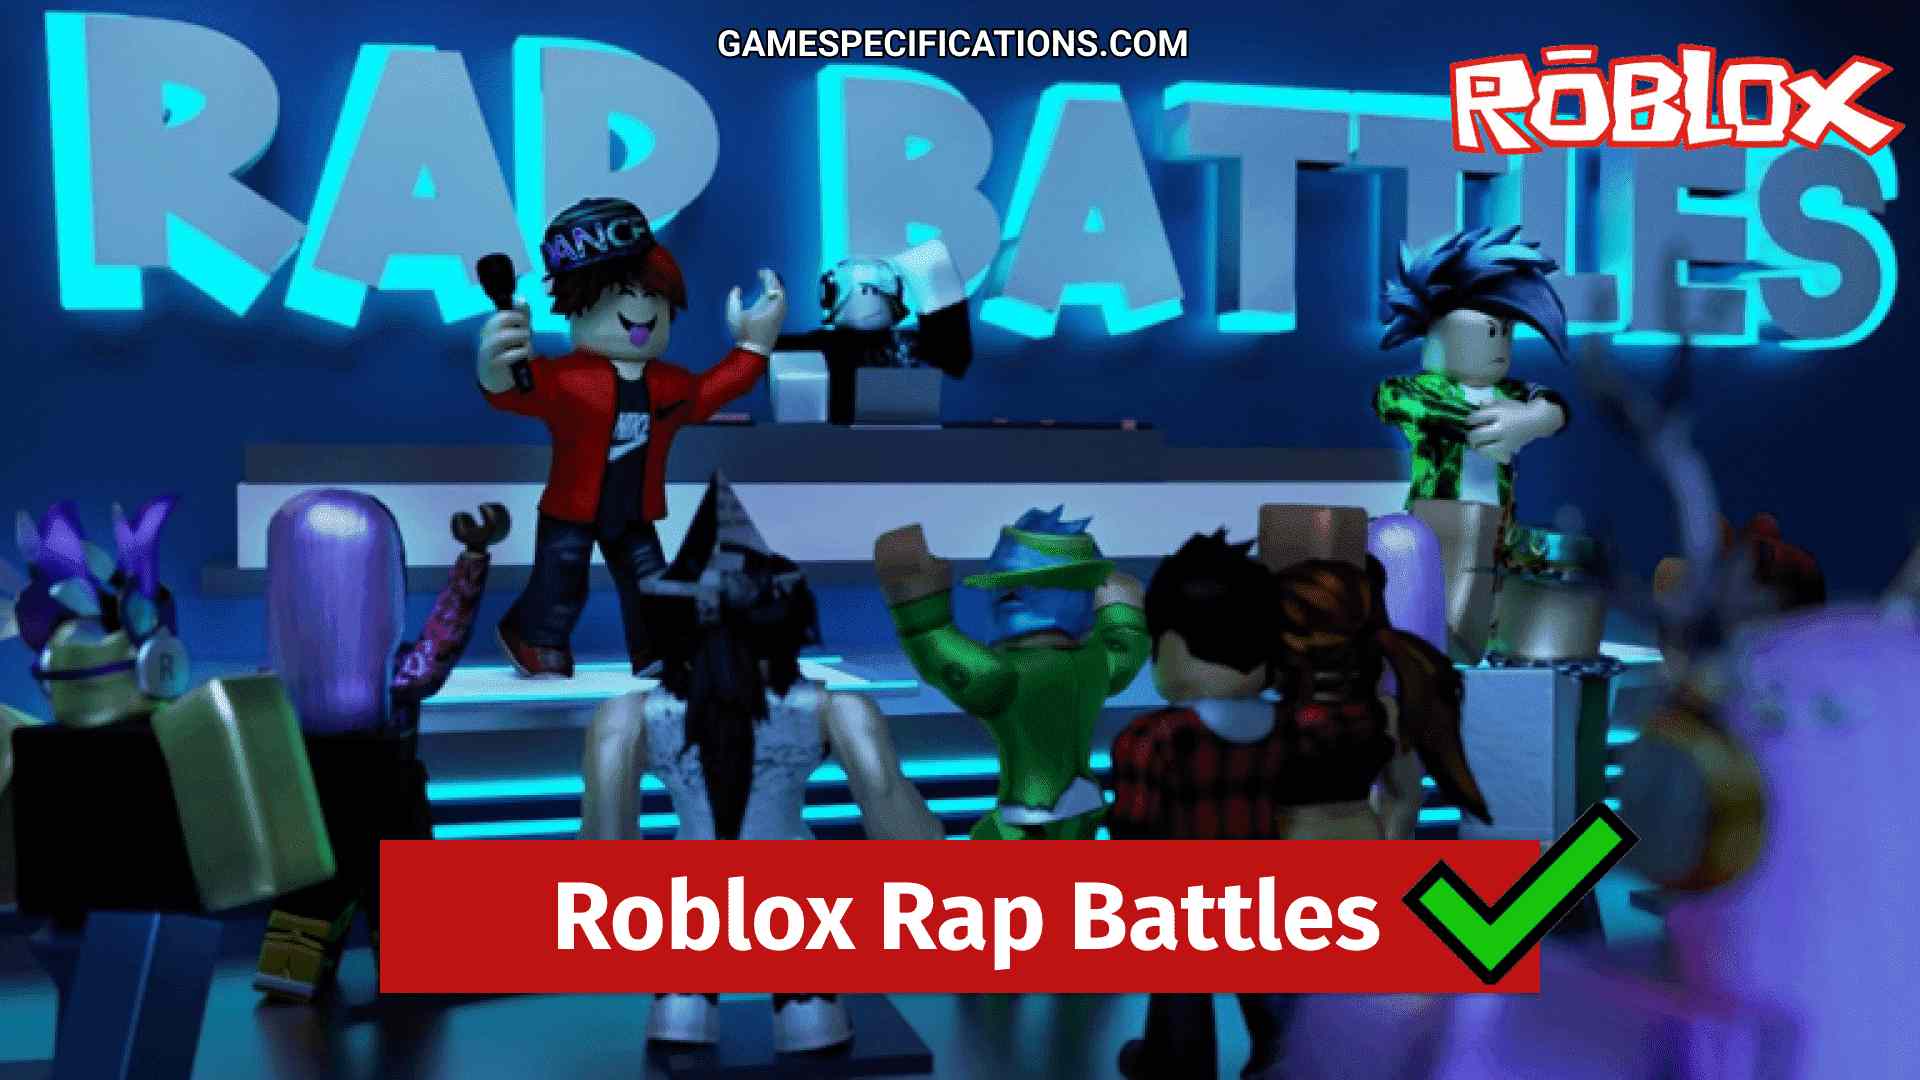 Awesome Roblox Rap Battles Explained With Lyrics Game Specifications - roblox auto rap battles best rap